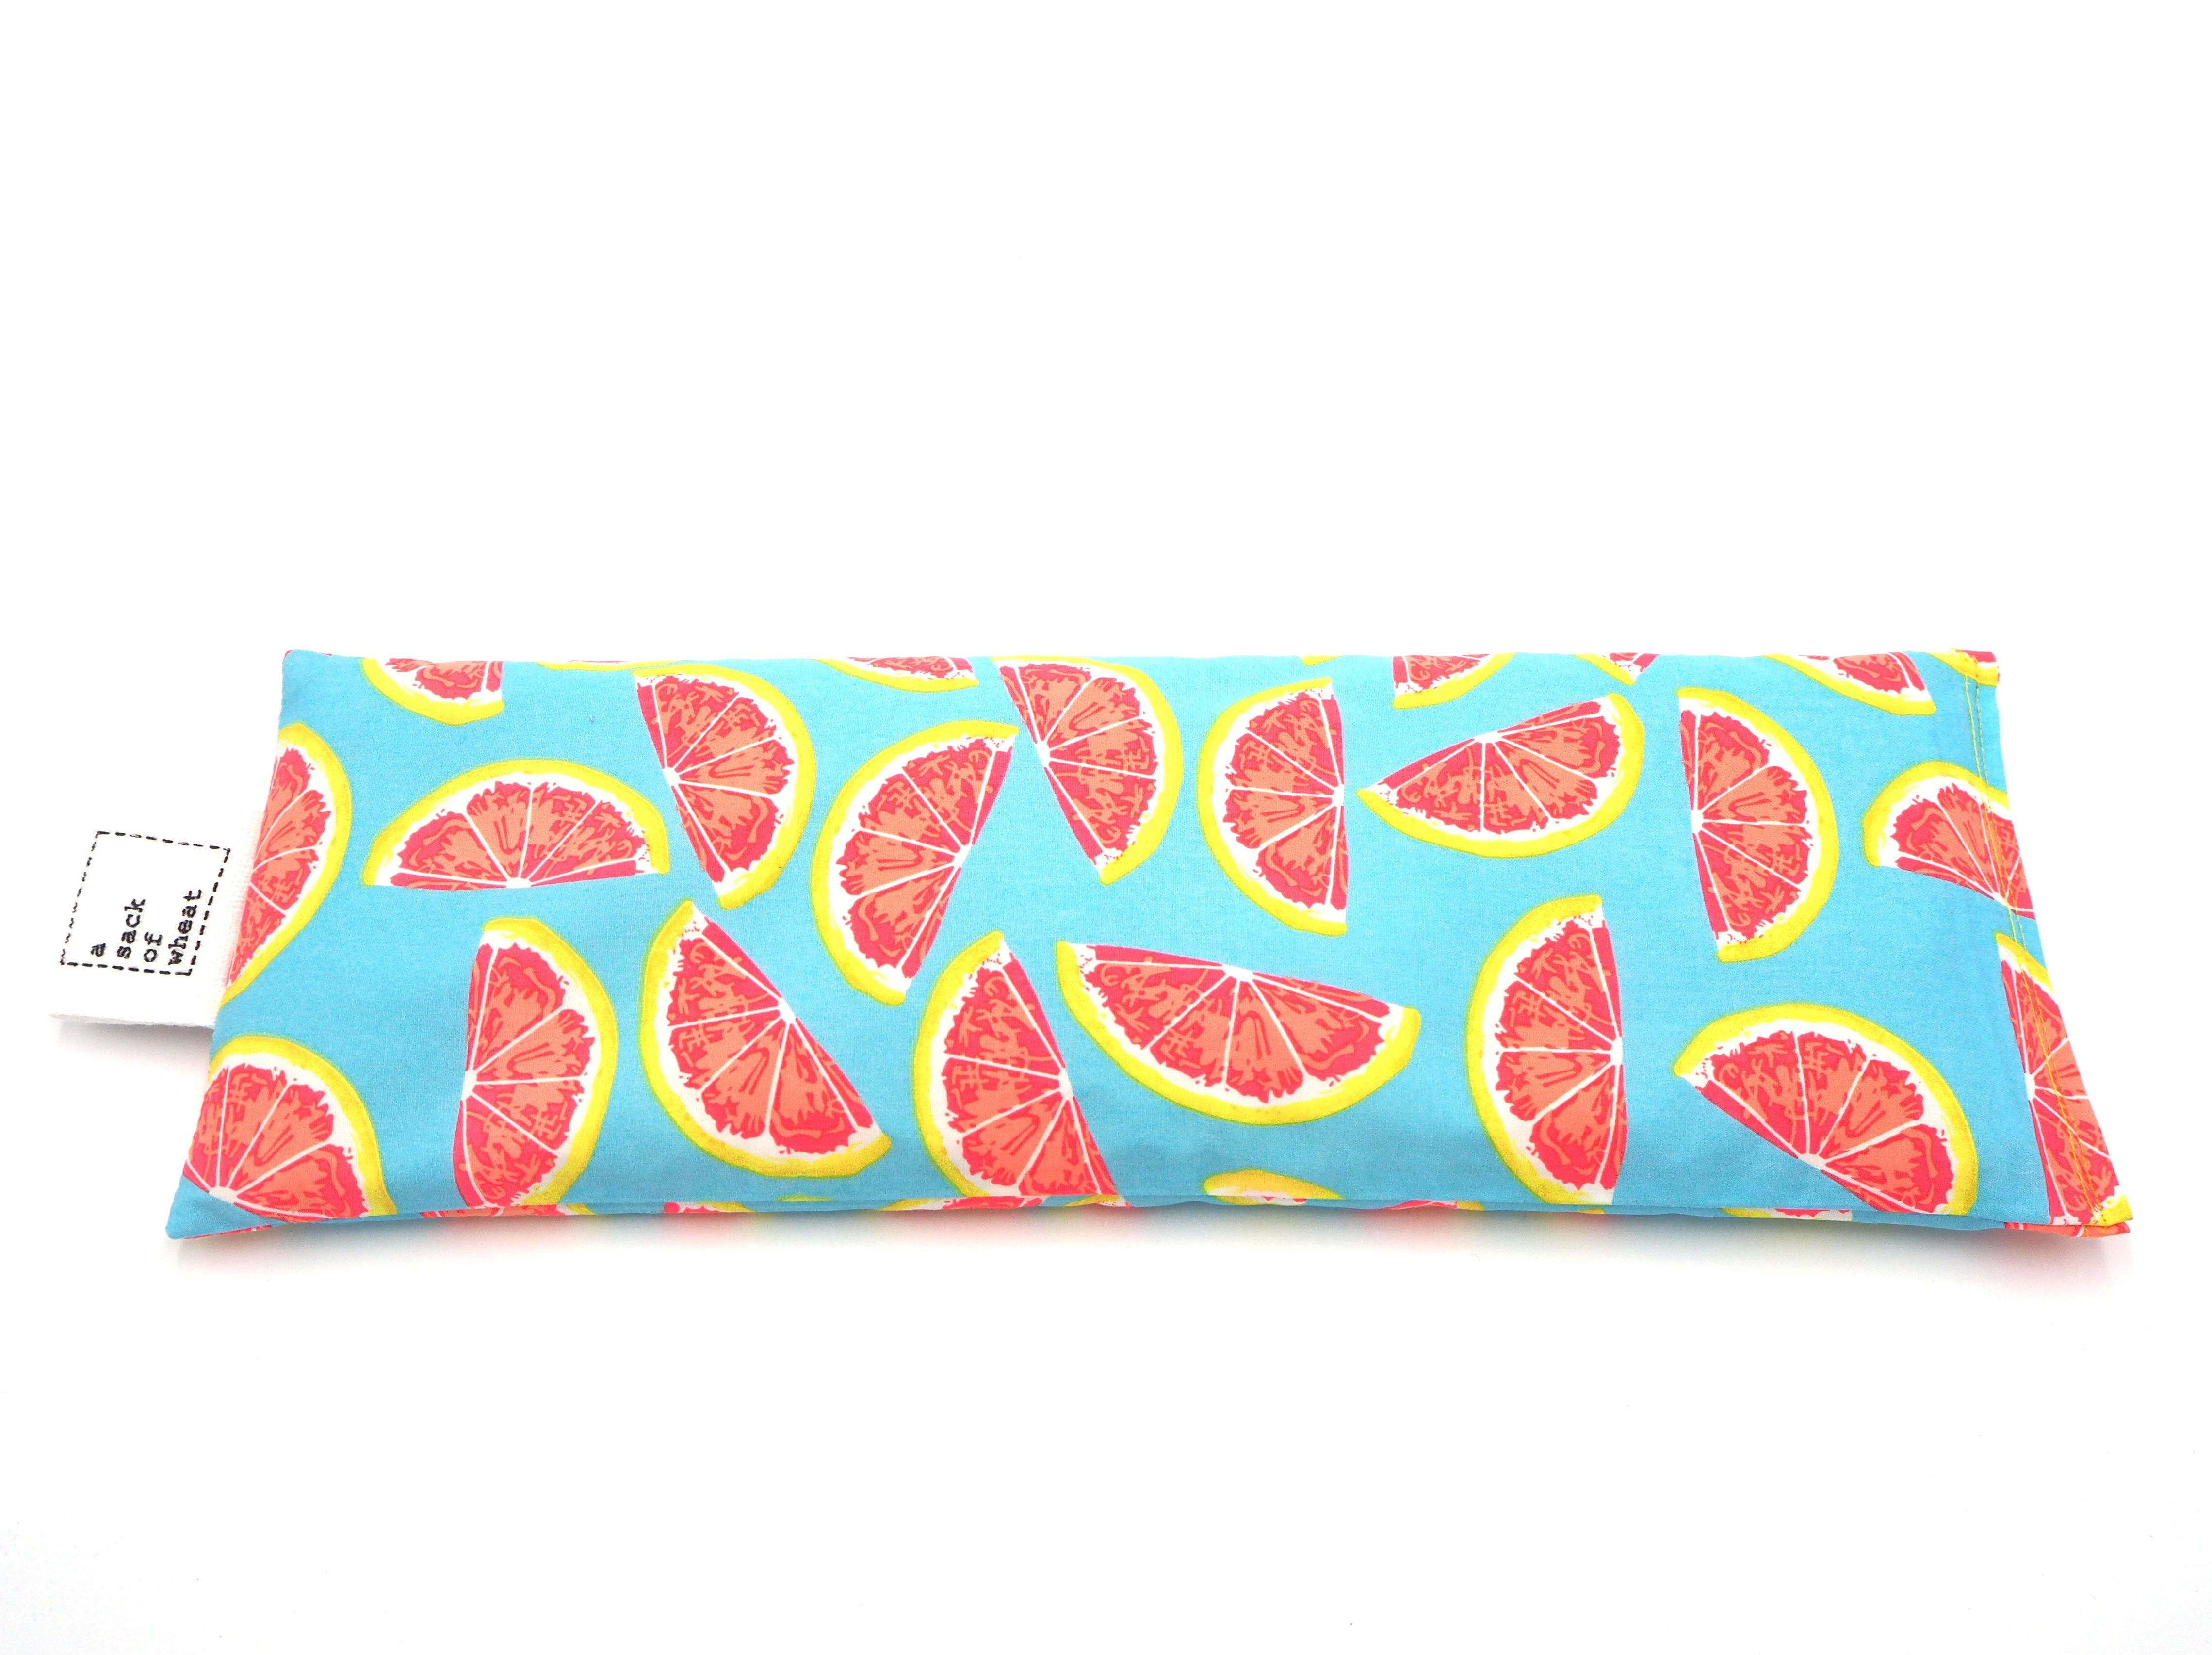 Flat view of A Sack Of Wheat, slices of citrus fruit print on 100% cotton fabric Image